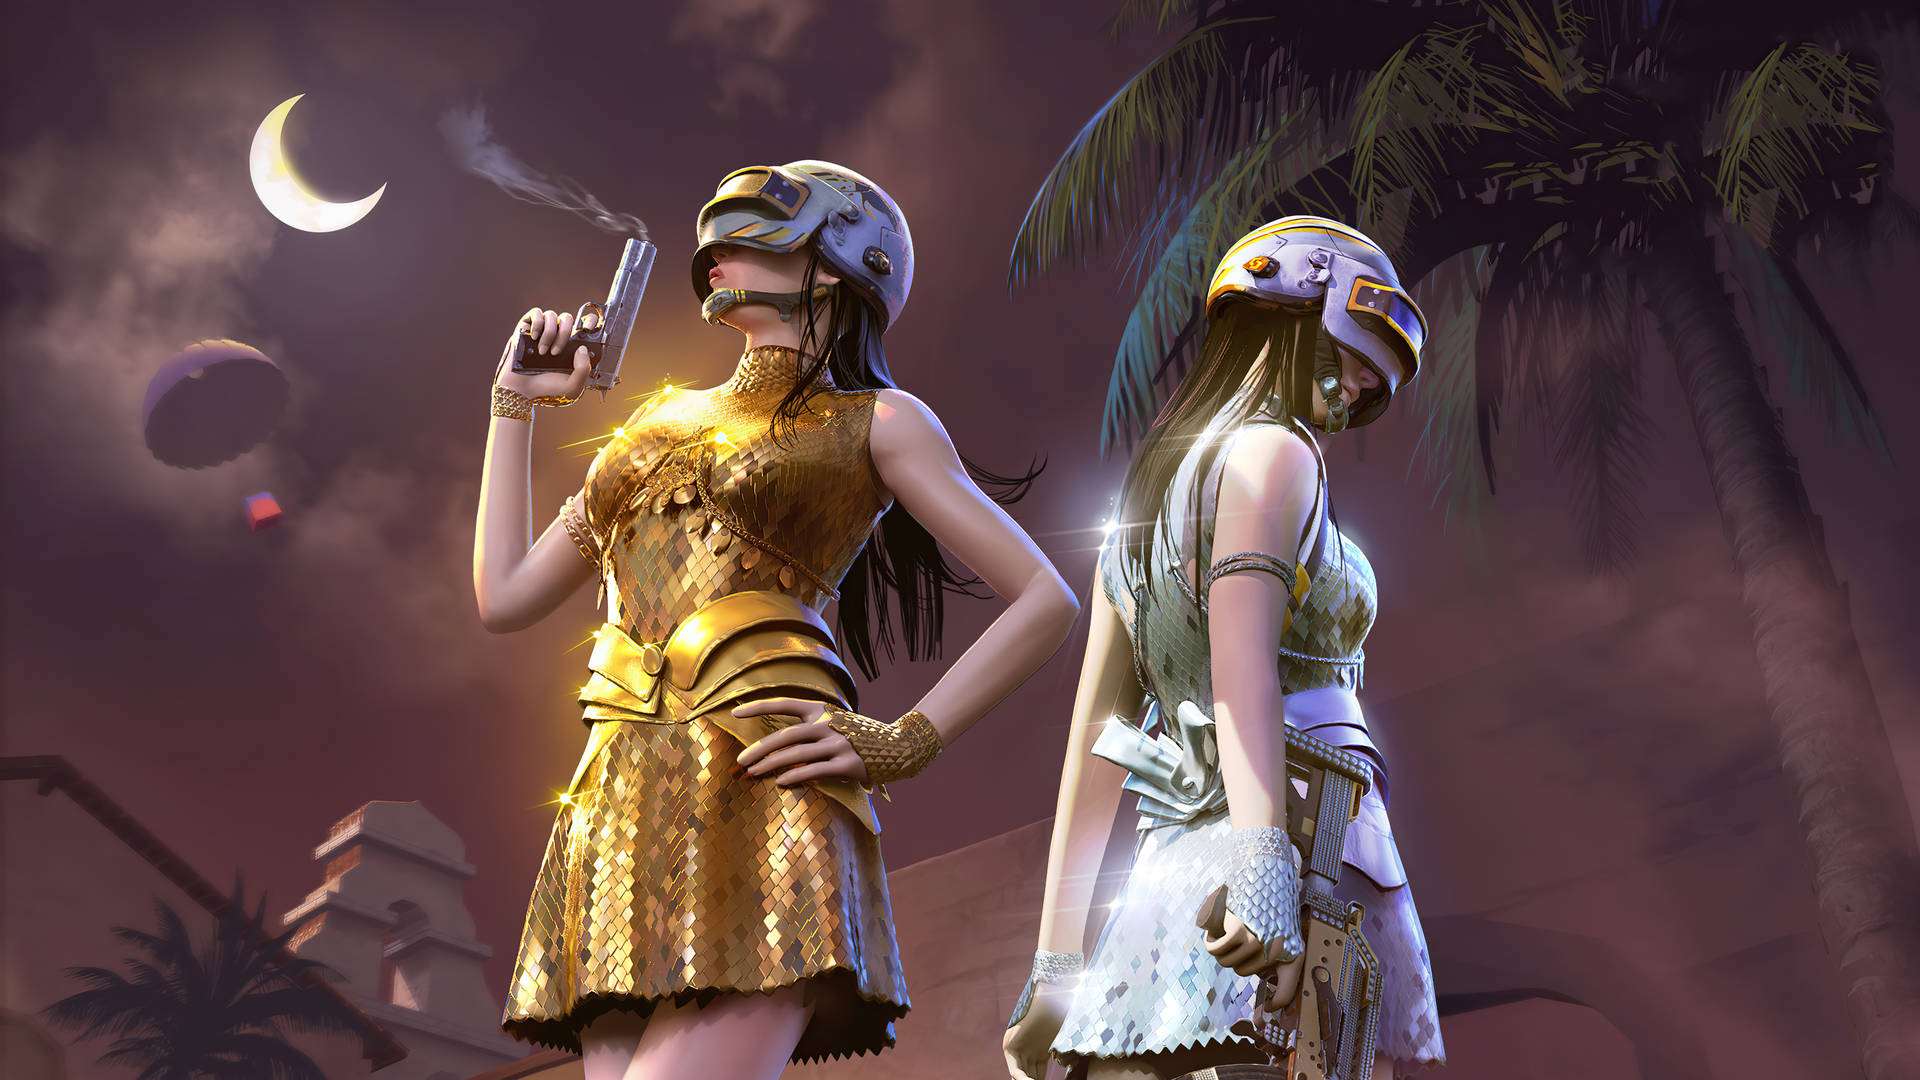 PUBG Squad Two Girls Silver And Golden Dress Wallpaper